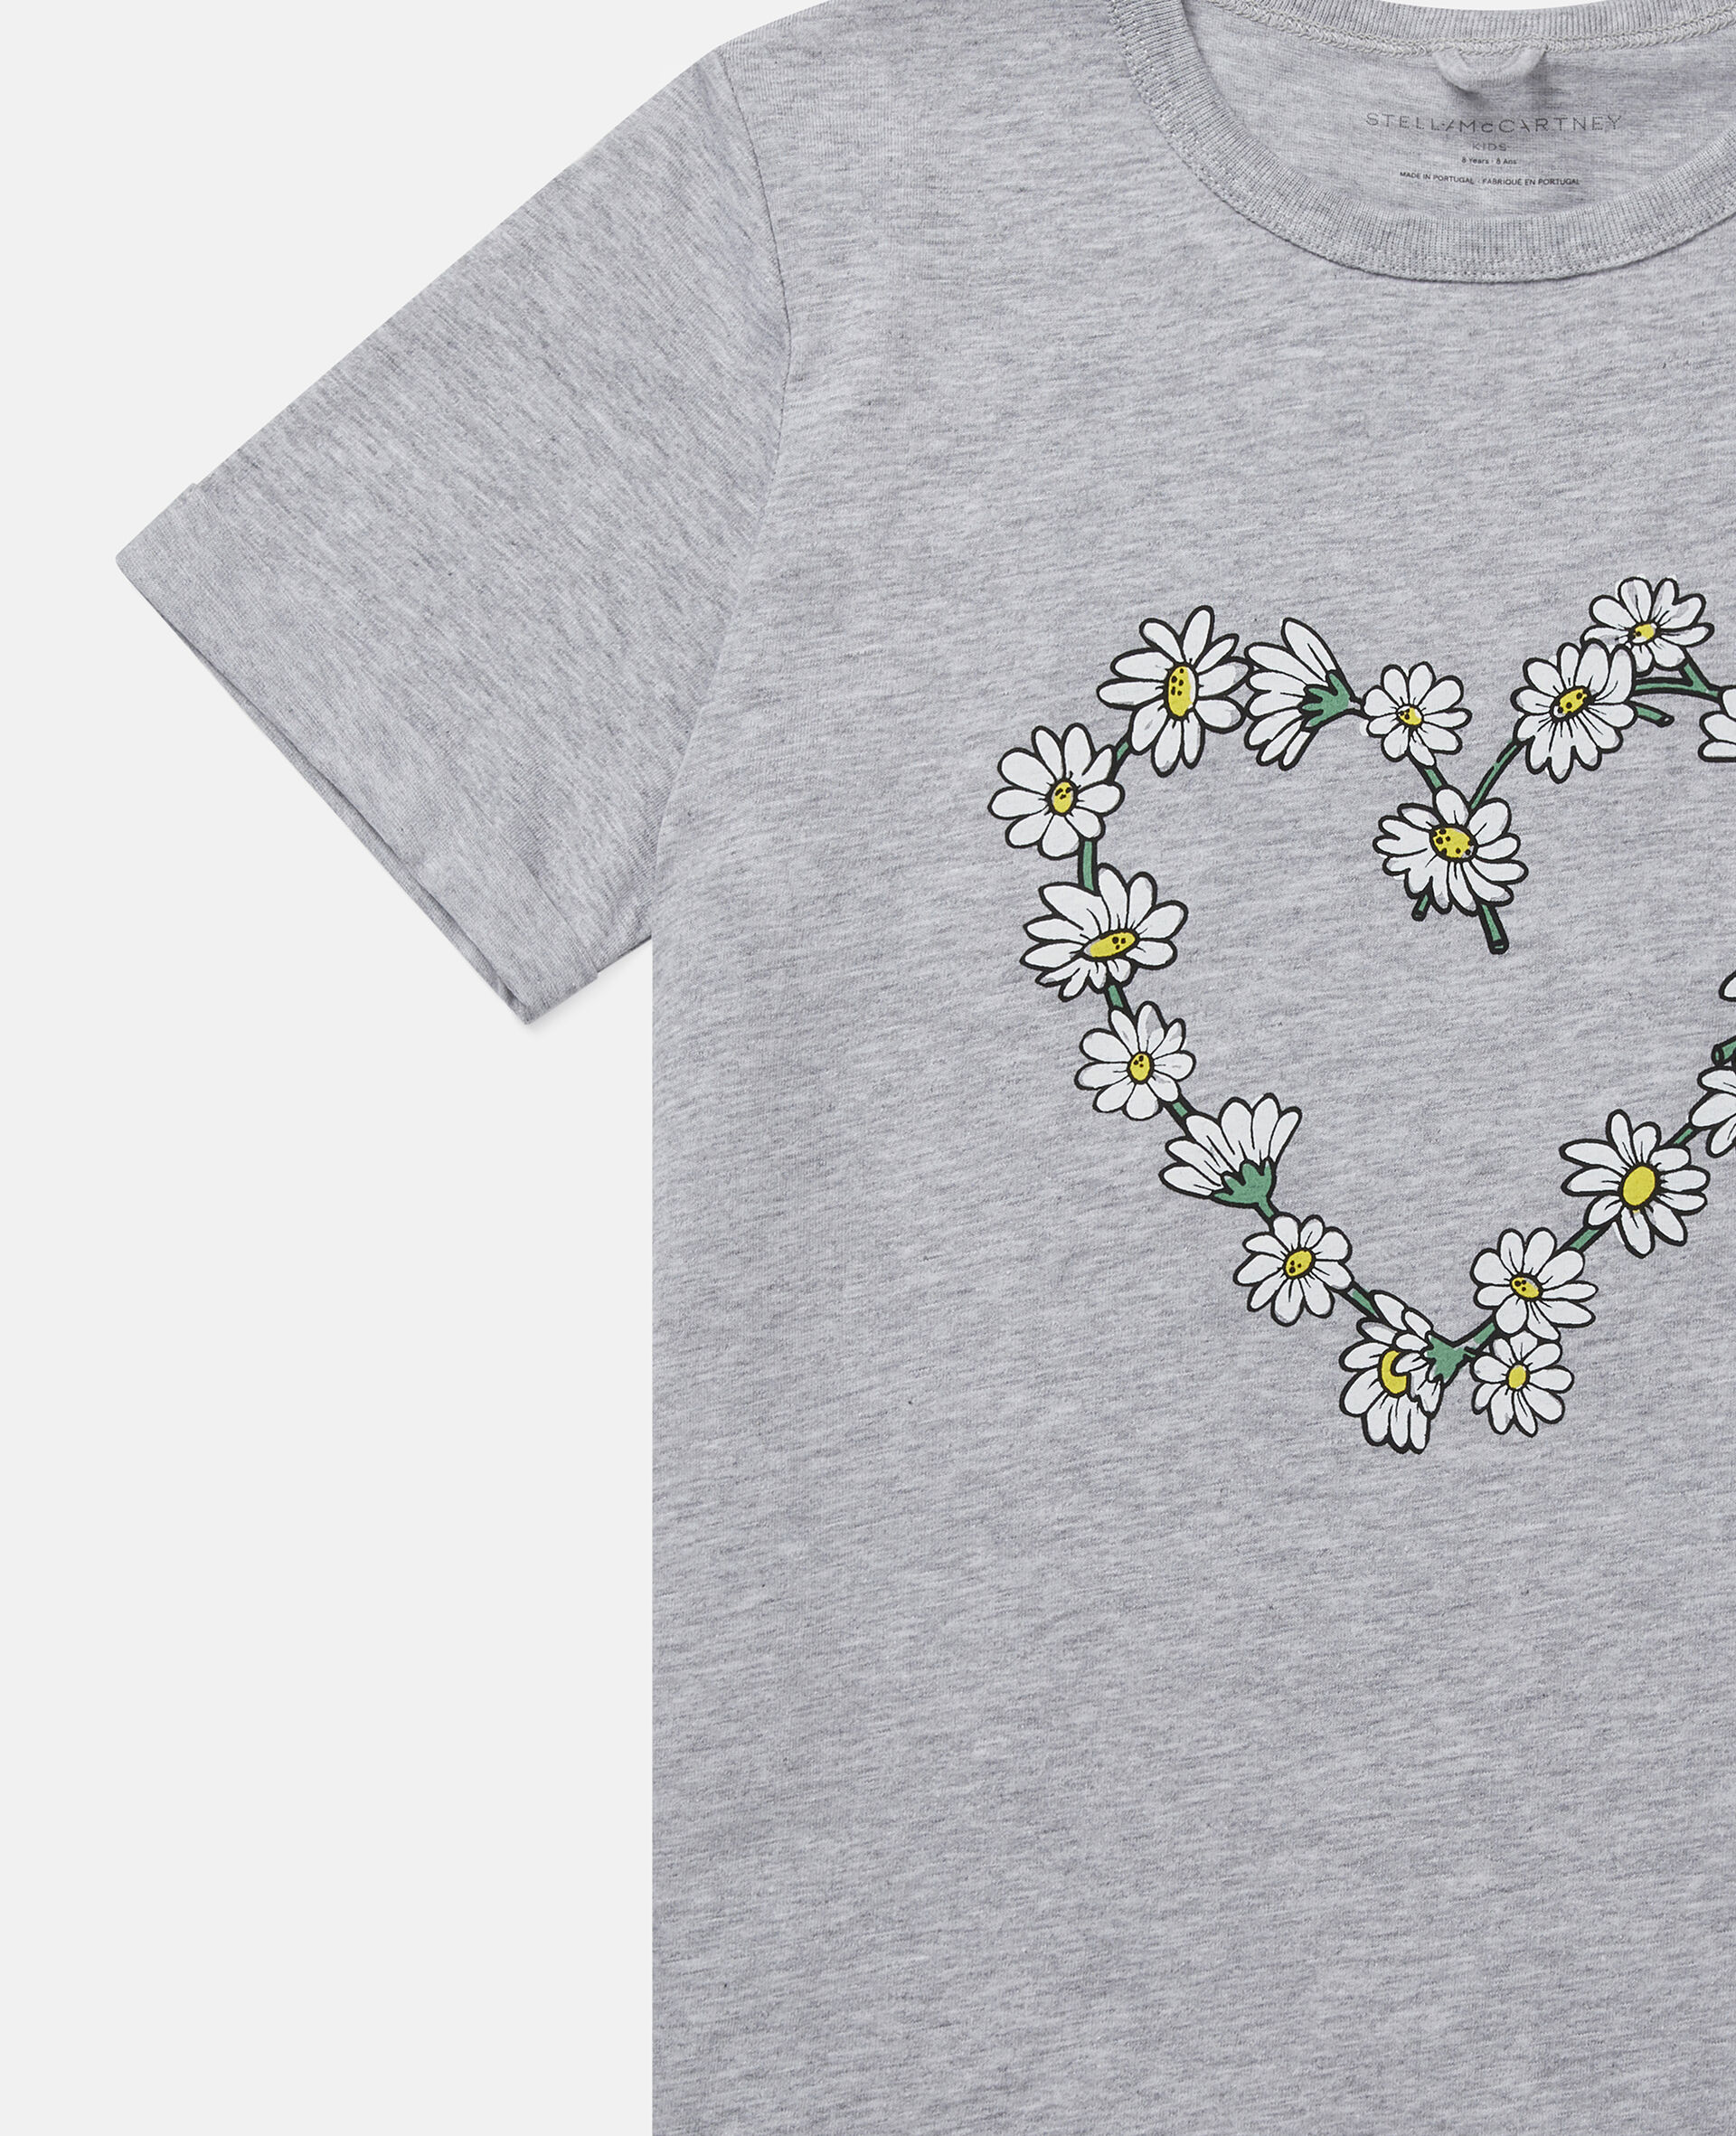 Daisy Heart Cotton T-Shirt-Grey-large image number 2